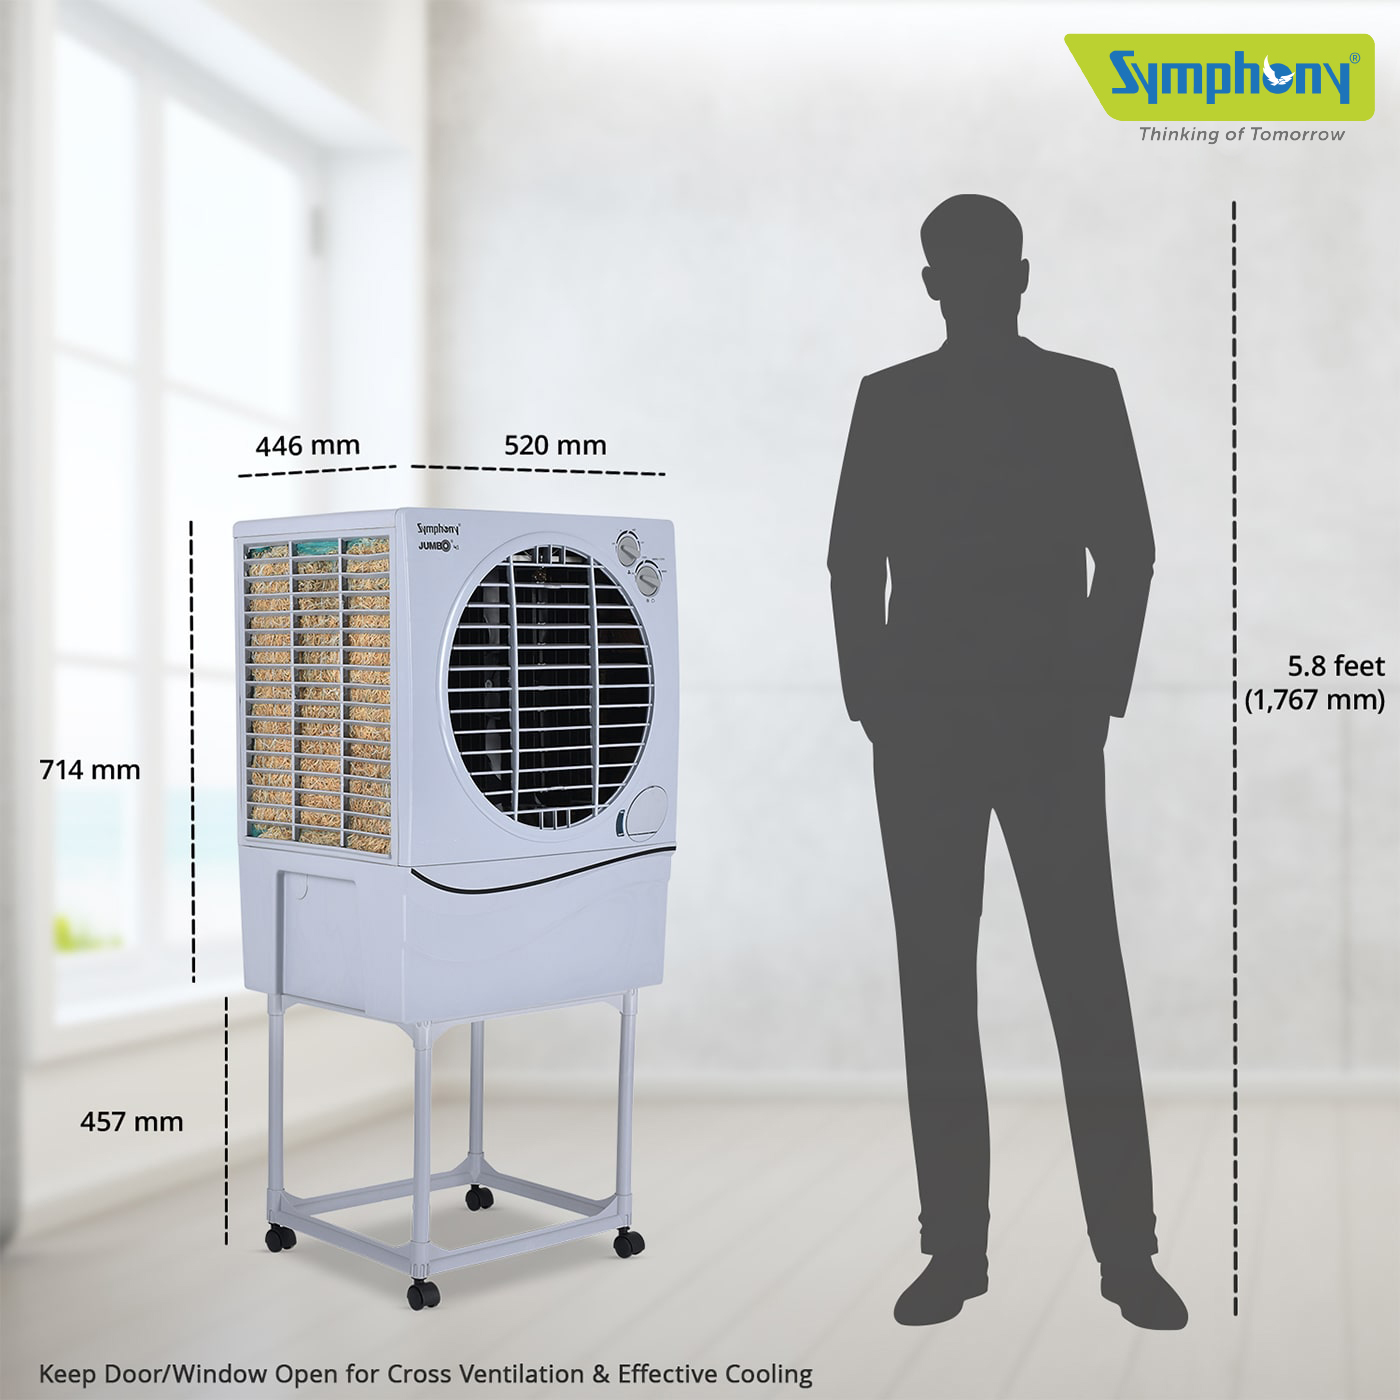 Jumbo 41L Room Air Cooler with Trolley